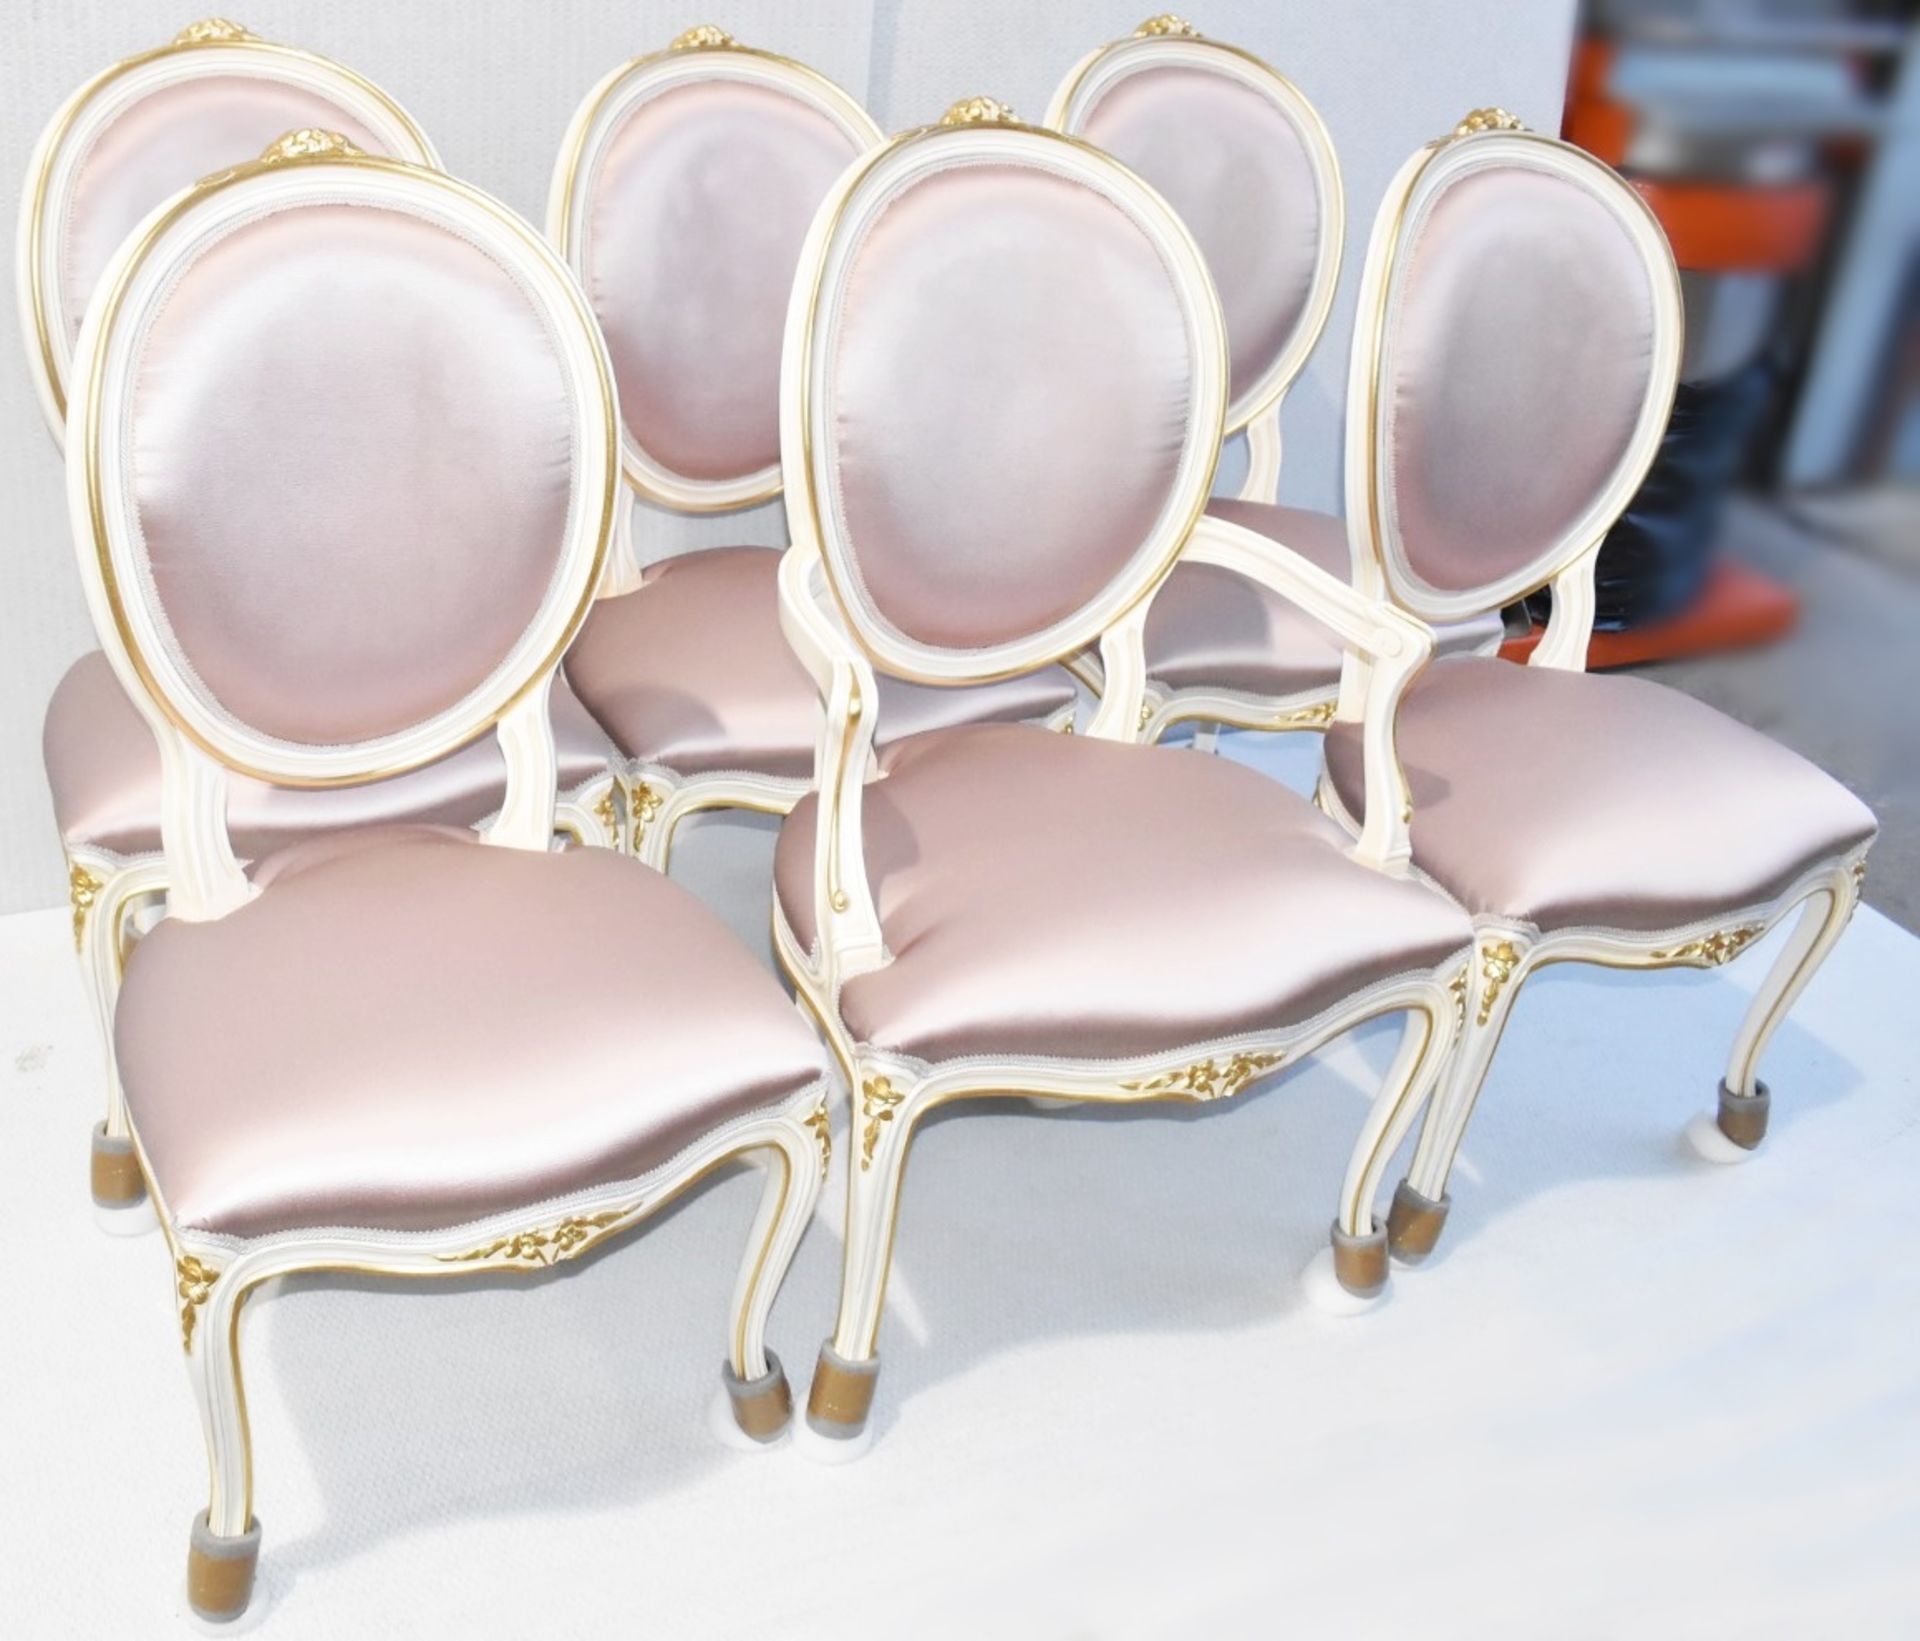 Set of 6 x ANGELO CAPPELLINI 'Timeless' Baroque-style Carved Dining Chairs, Upholstered in Pink Silk